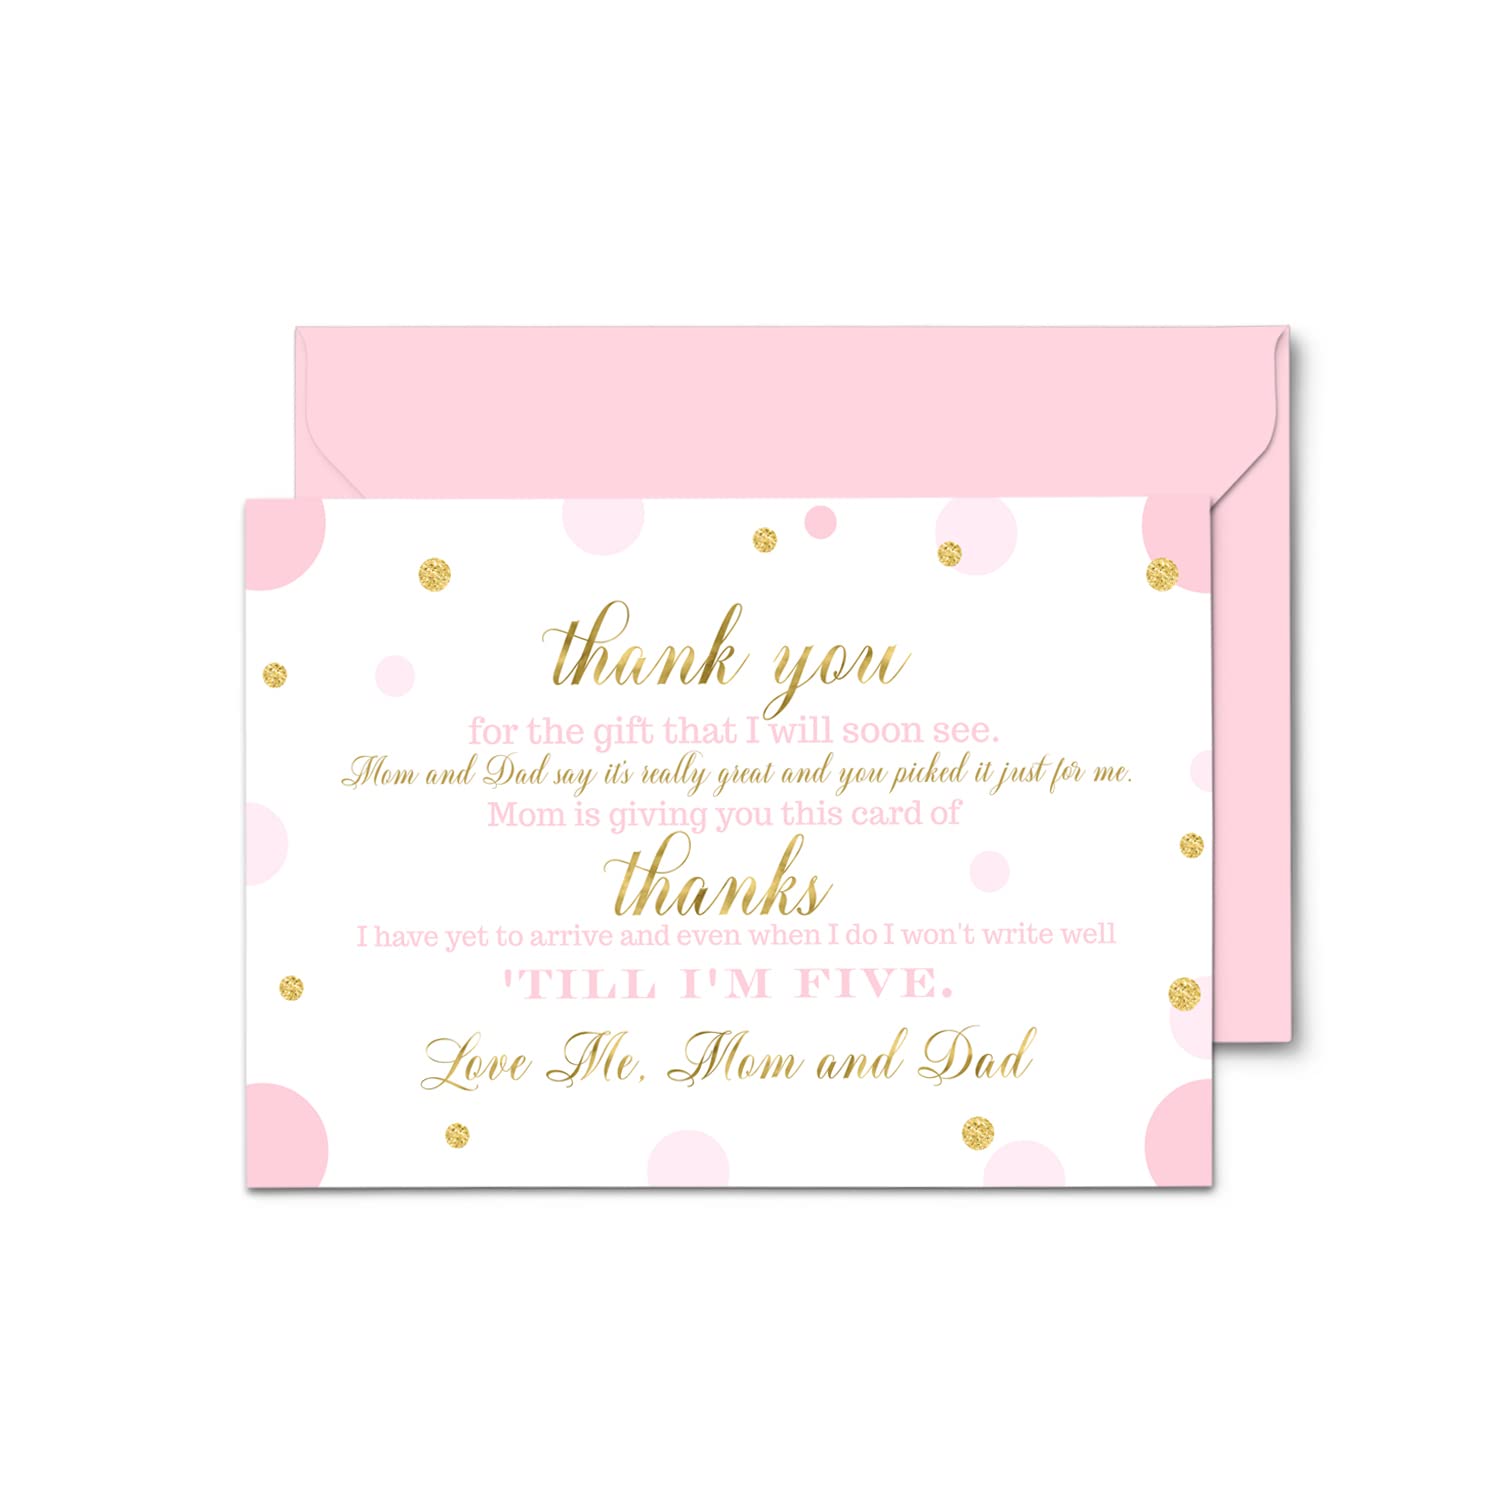 Paper Clever Party Pink and Gold Baby Shower Thank You Cards with Envelopes (15 Pack) Prefilled Note from Girl Individual Notecards for Babies Registry Princess Theme Little Star 4x6 Blank Set